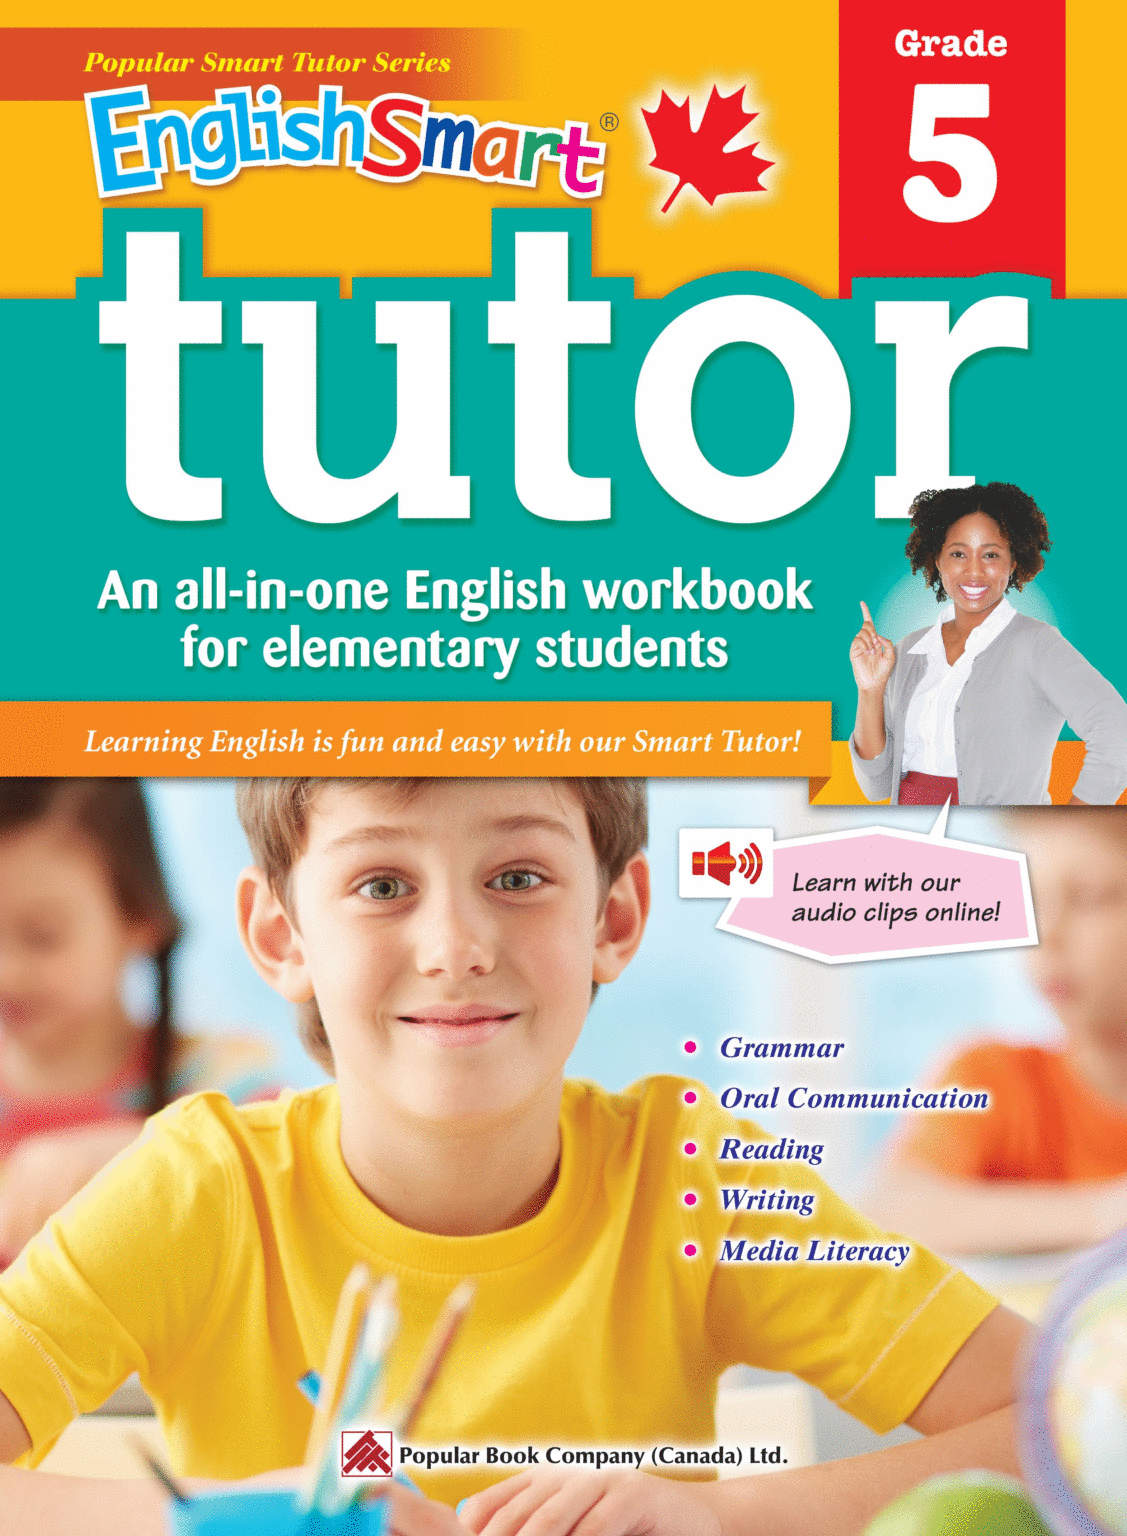 Englishsmart Tutor 5 A Grade 5 English Workbook With Corresponding Audio Clips To Develop And 0927